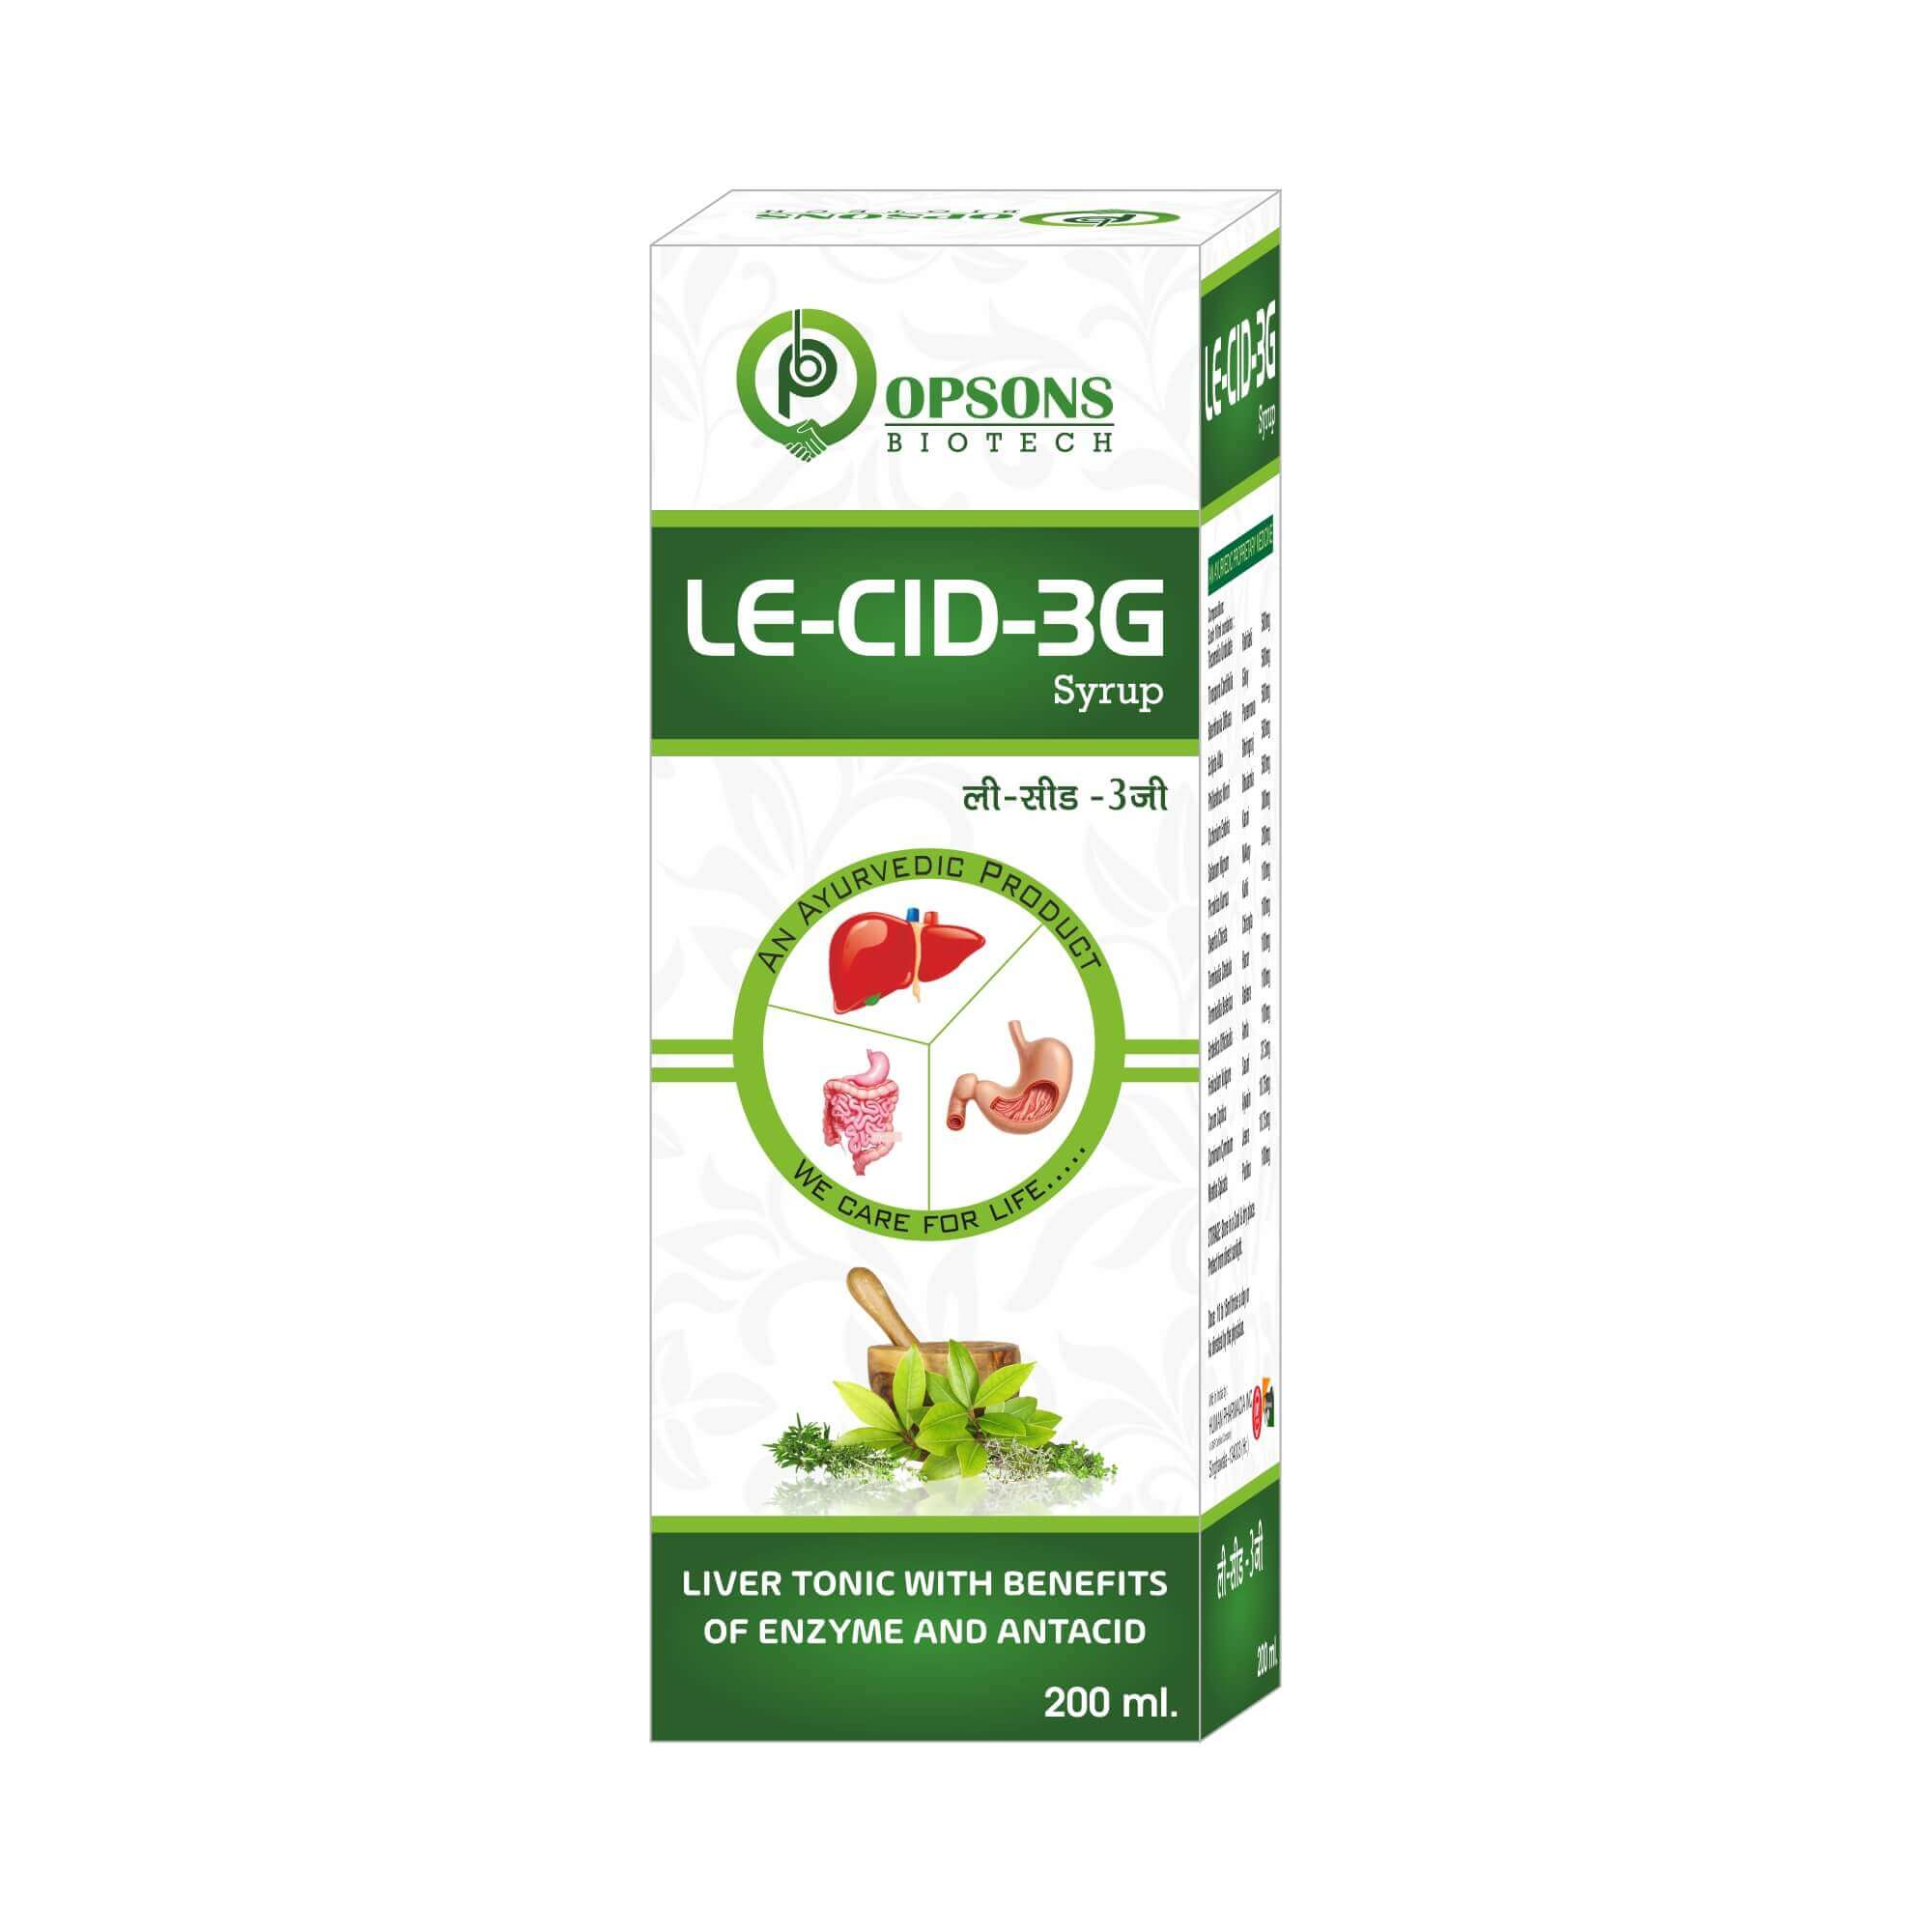 Product Name: Le Cid 3G, Compositions of Le Cid 3G are Liver Tonic WithBenefits Of Enzyme And Antacid - Opsons Biotech